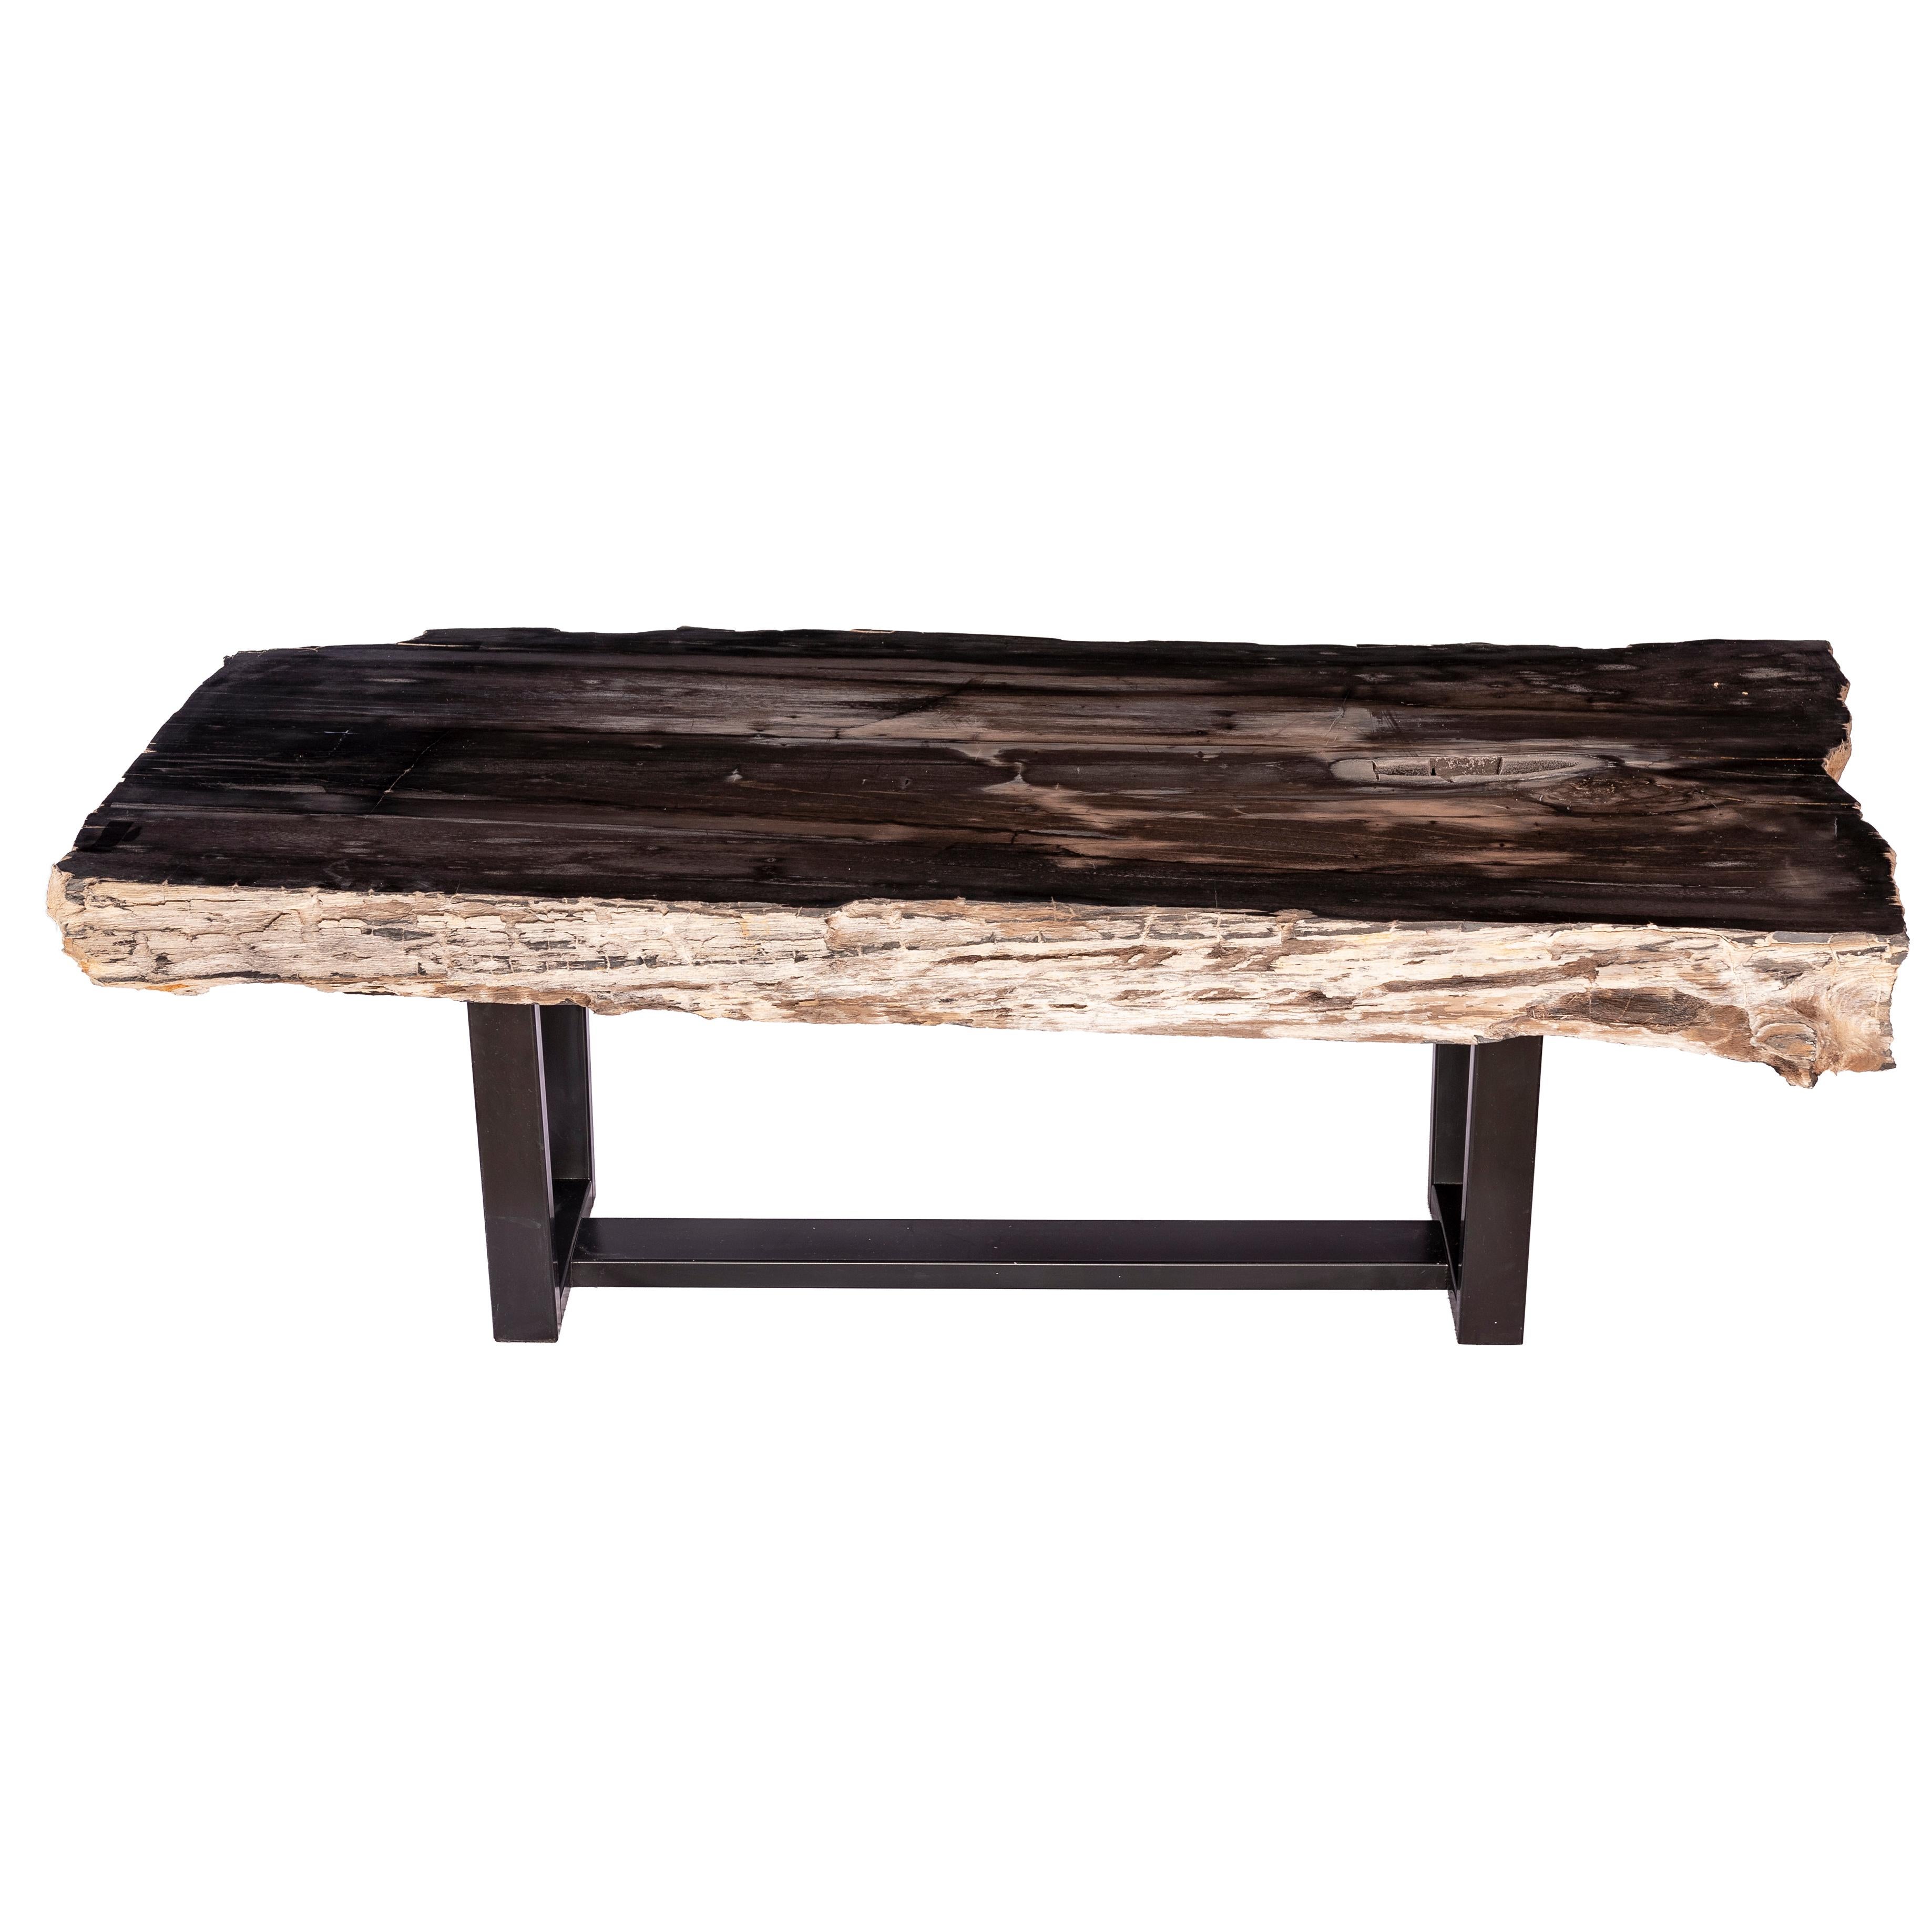 Mexican Center of Coffee Table, Rectangular Shape, Petrified Wood with Metal Base